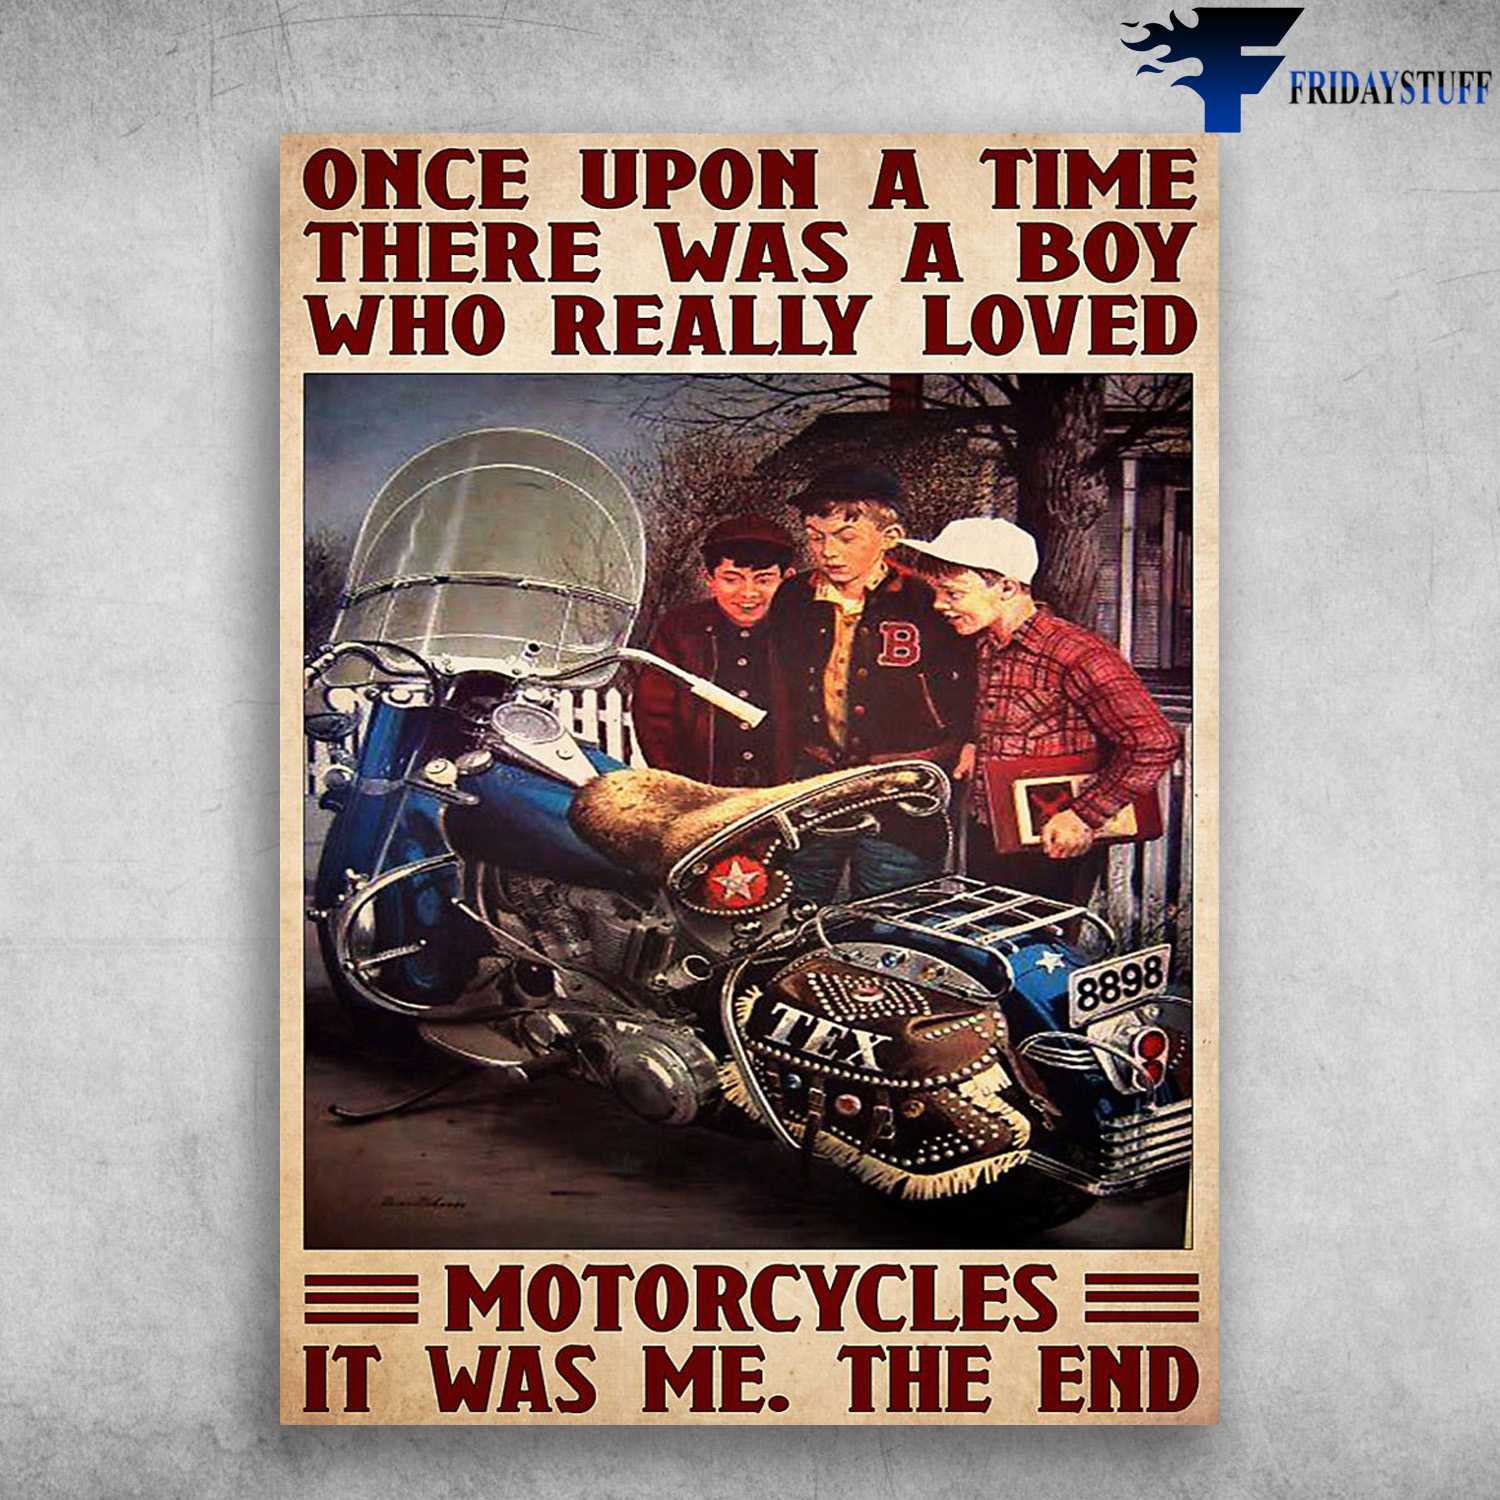 Boys Love Motorcycle, Biker Lover - Once Upon A Time, There Was Aboy, Who Really Loved, Motorcycles, It Was Me, The End